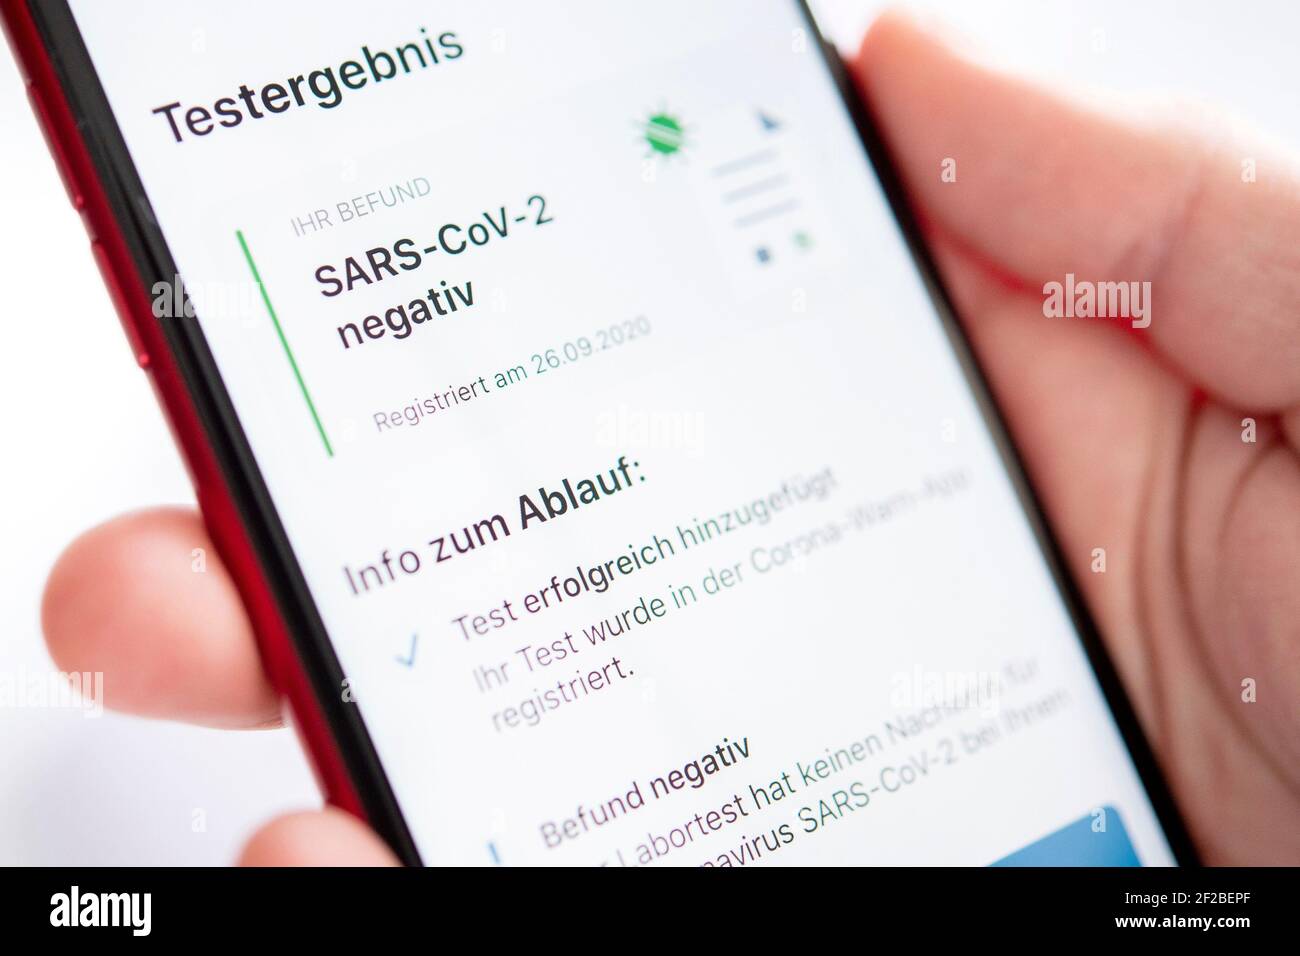 A woman opens the corona warning app of the german government on her smartphone in Oldenburg (Germany), 29 September 2020. The app shows a negative test result. Stock Photo